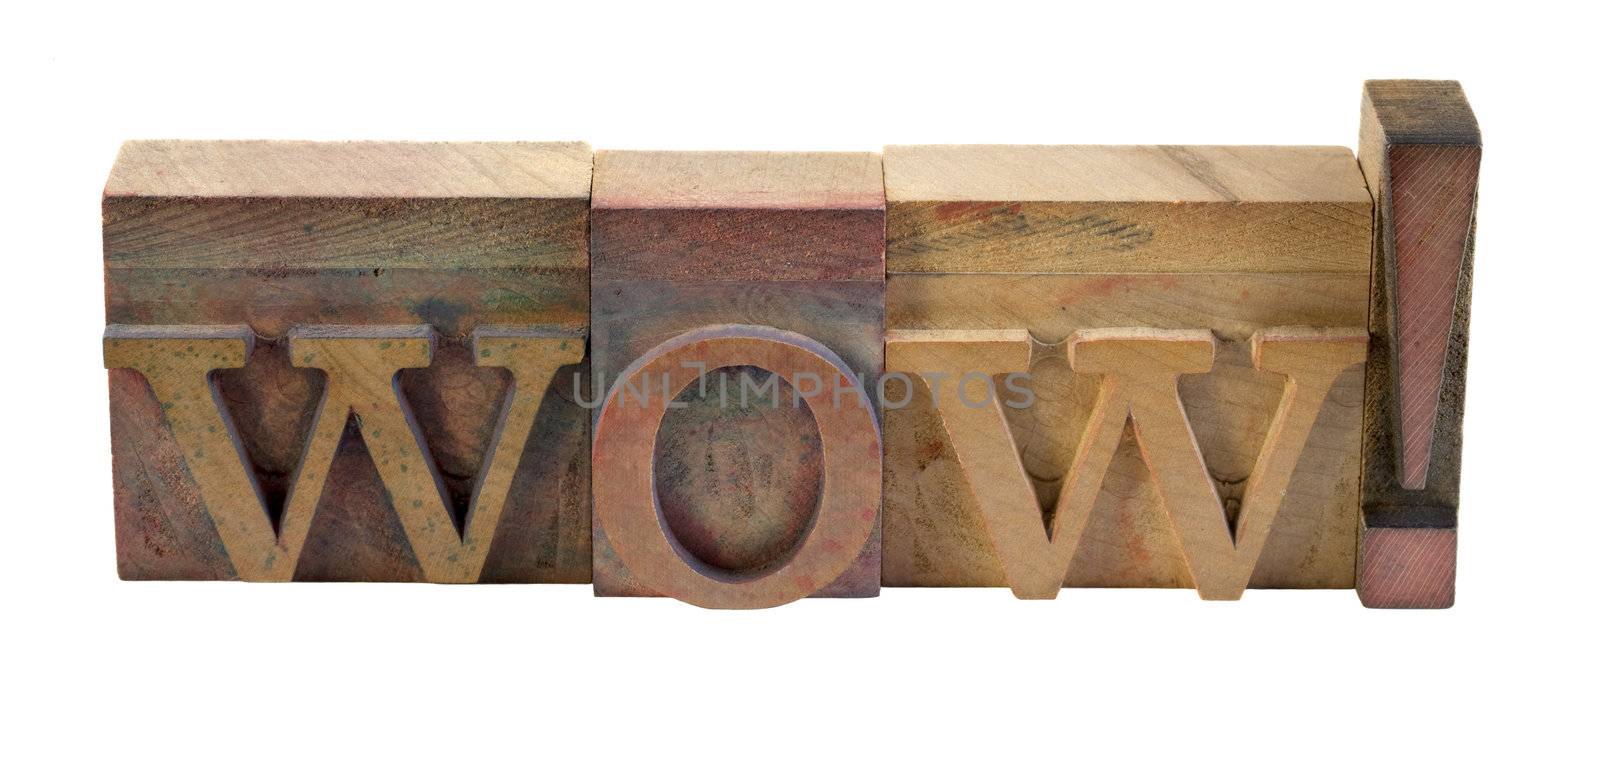 the exclamation word Wow in vintage wooden letterpress type blocks, stained by color inks, isolated on white